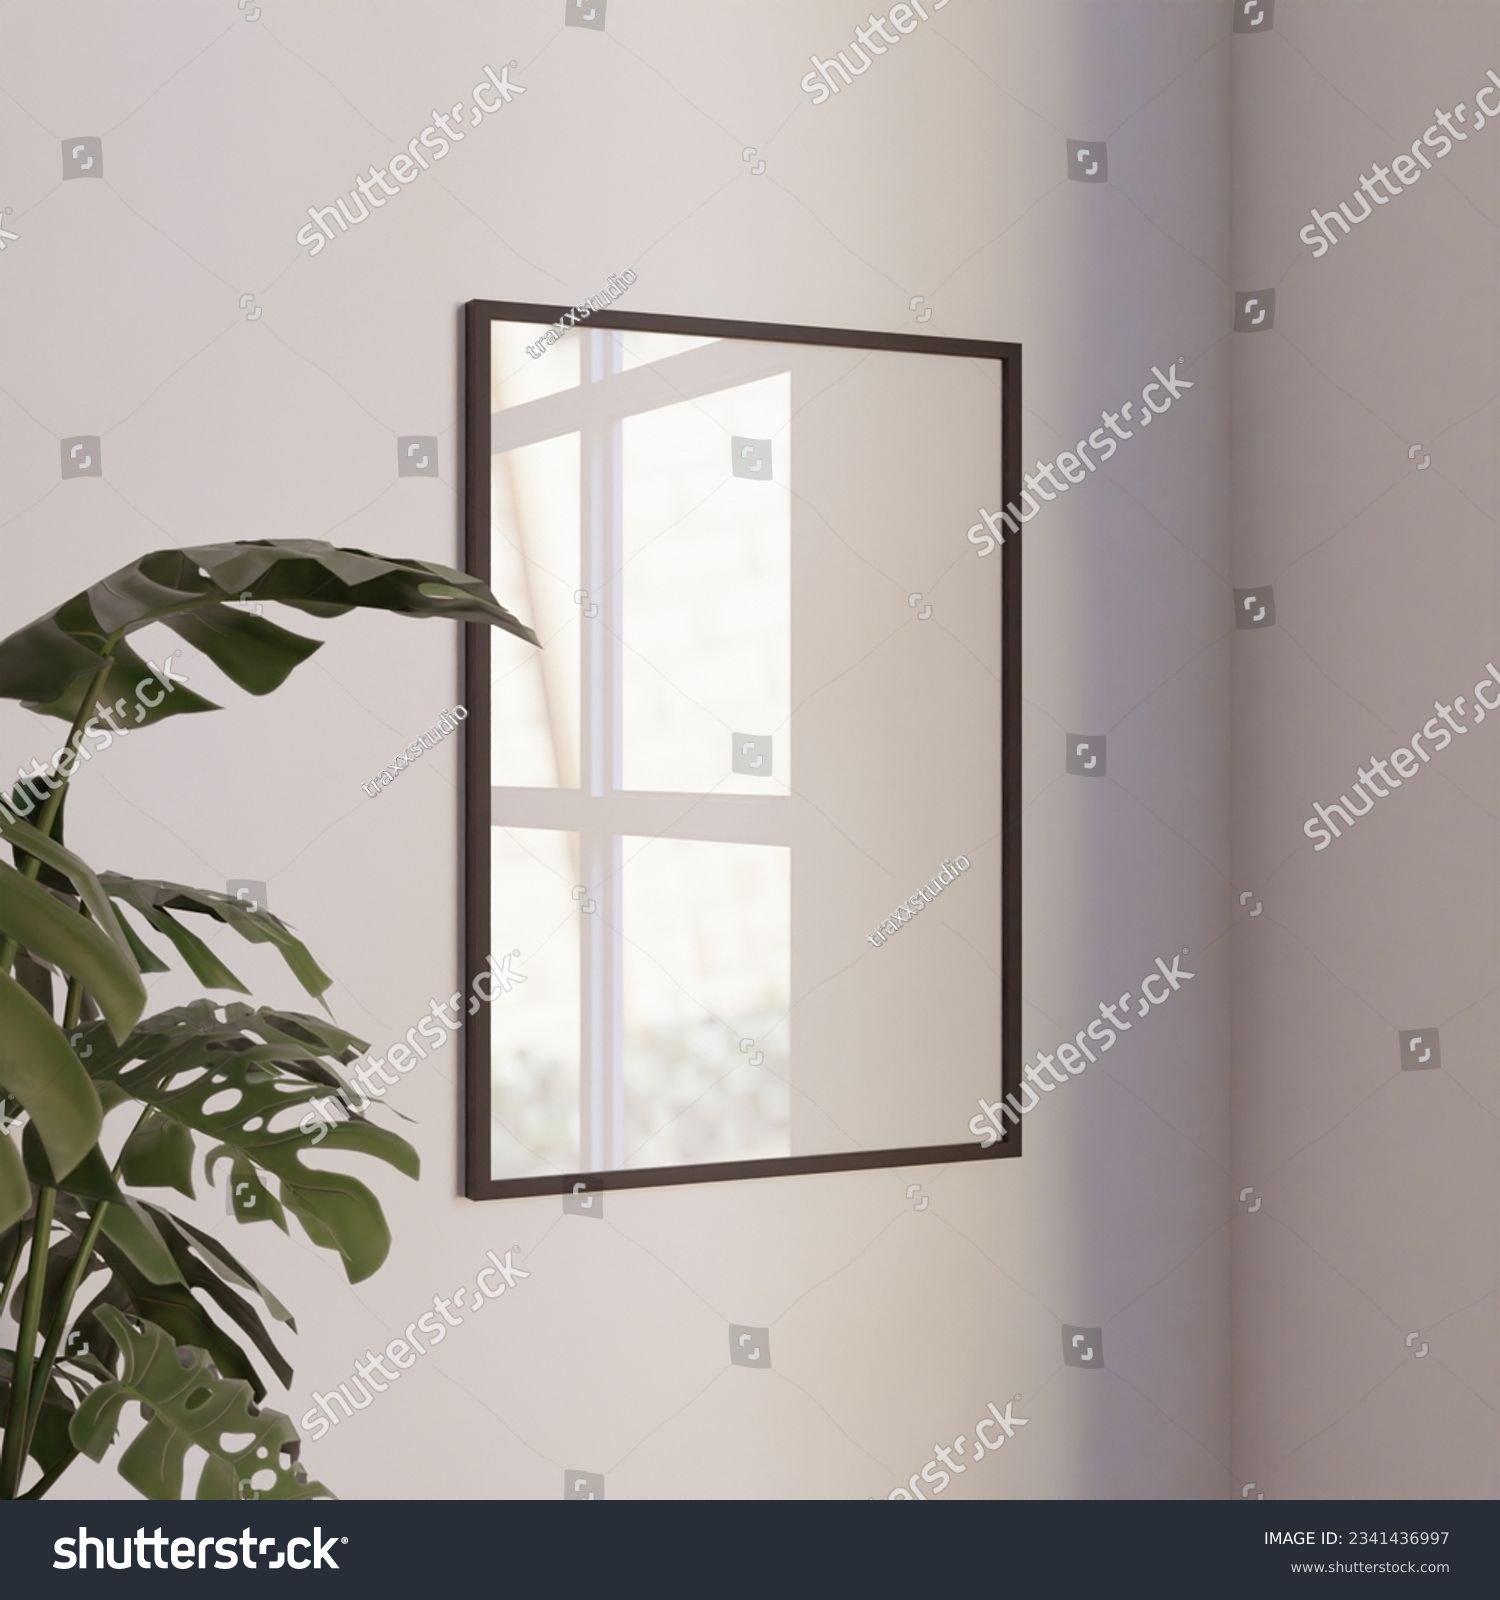 simple minimalist frame mockup poster hanging on the white wall with plant decoration. 50x70, 20x28, 20RP frame mockup poster. wall background with window light and shadow #2341436997